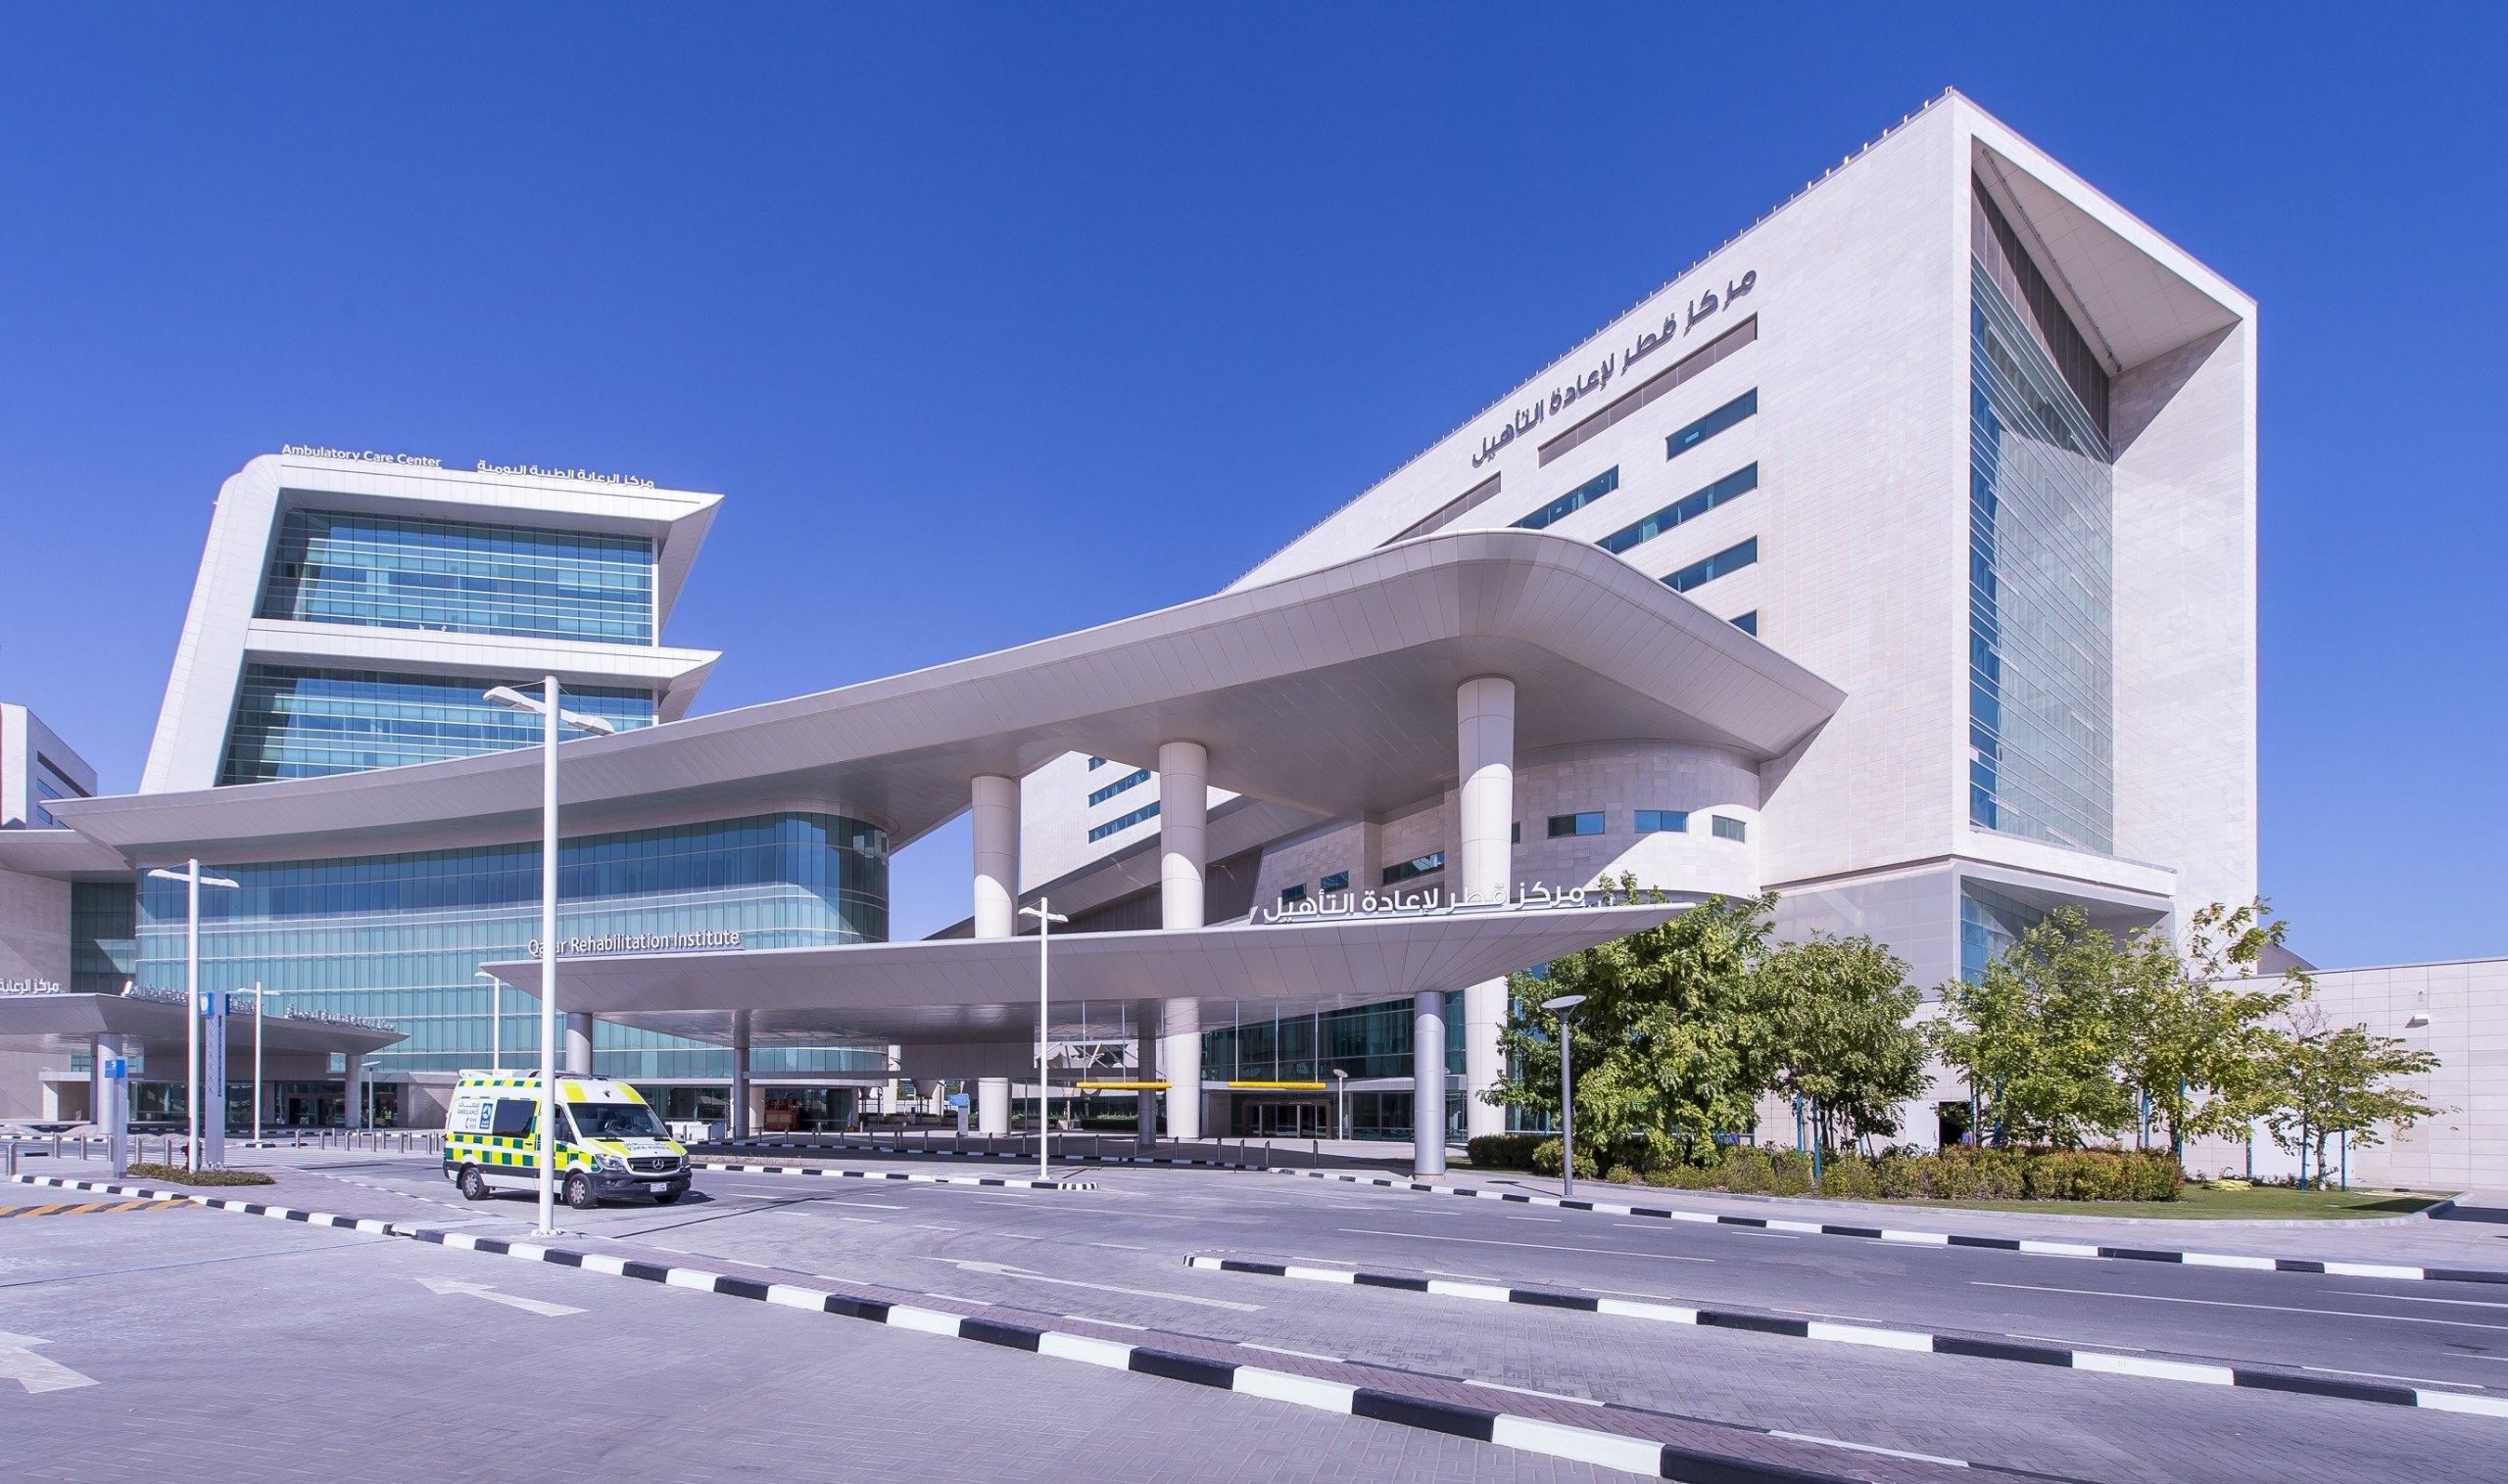 Hamad medics in Qatar save heart attack patient in record time